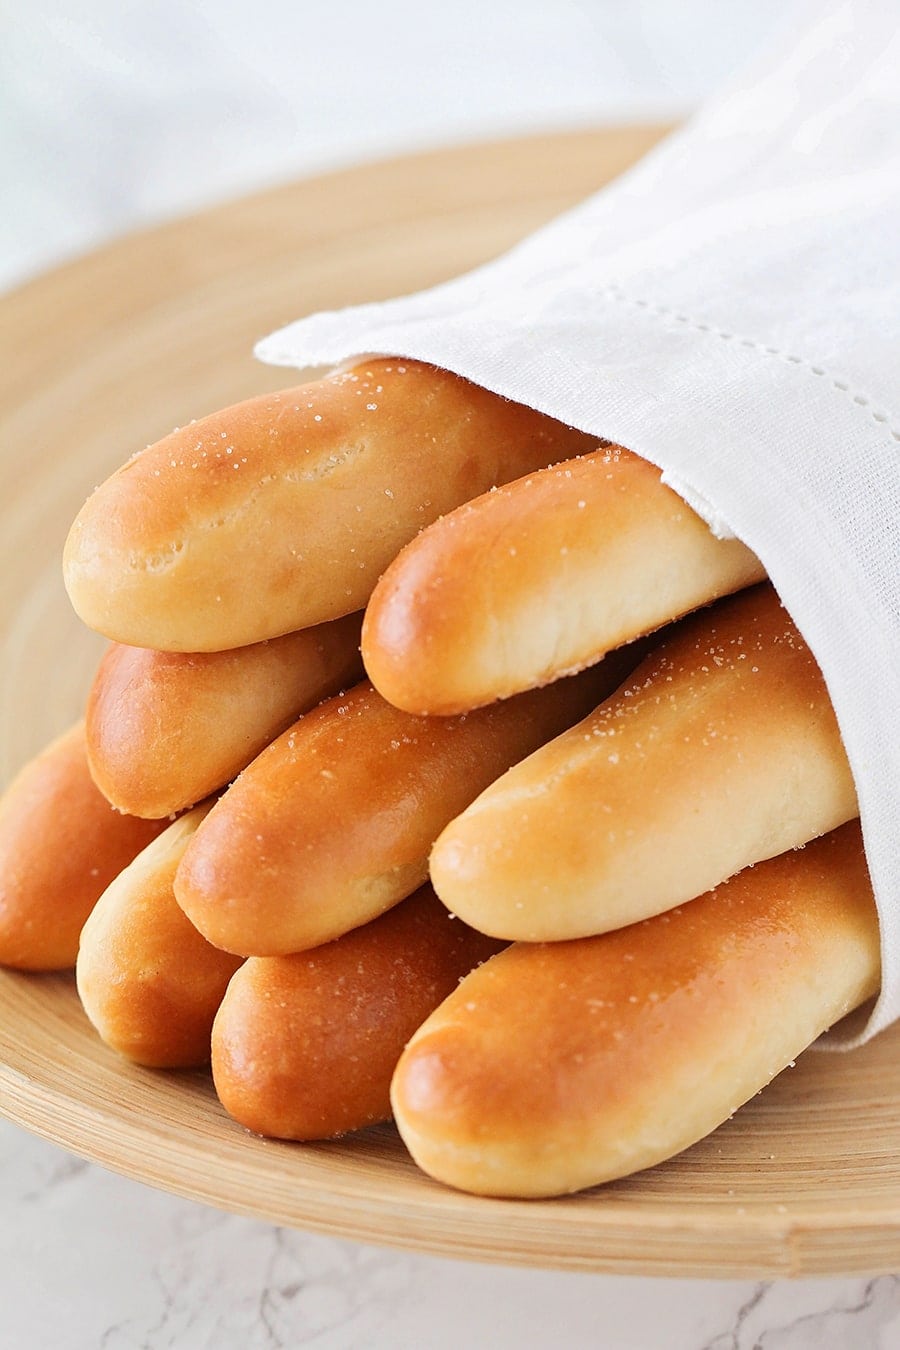 A bundle of breadsticks wrapped in a napkin